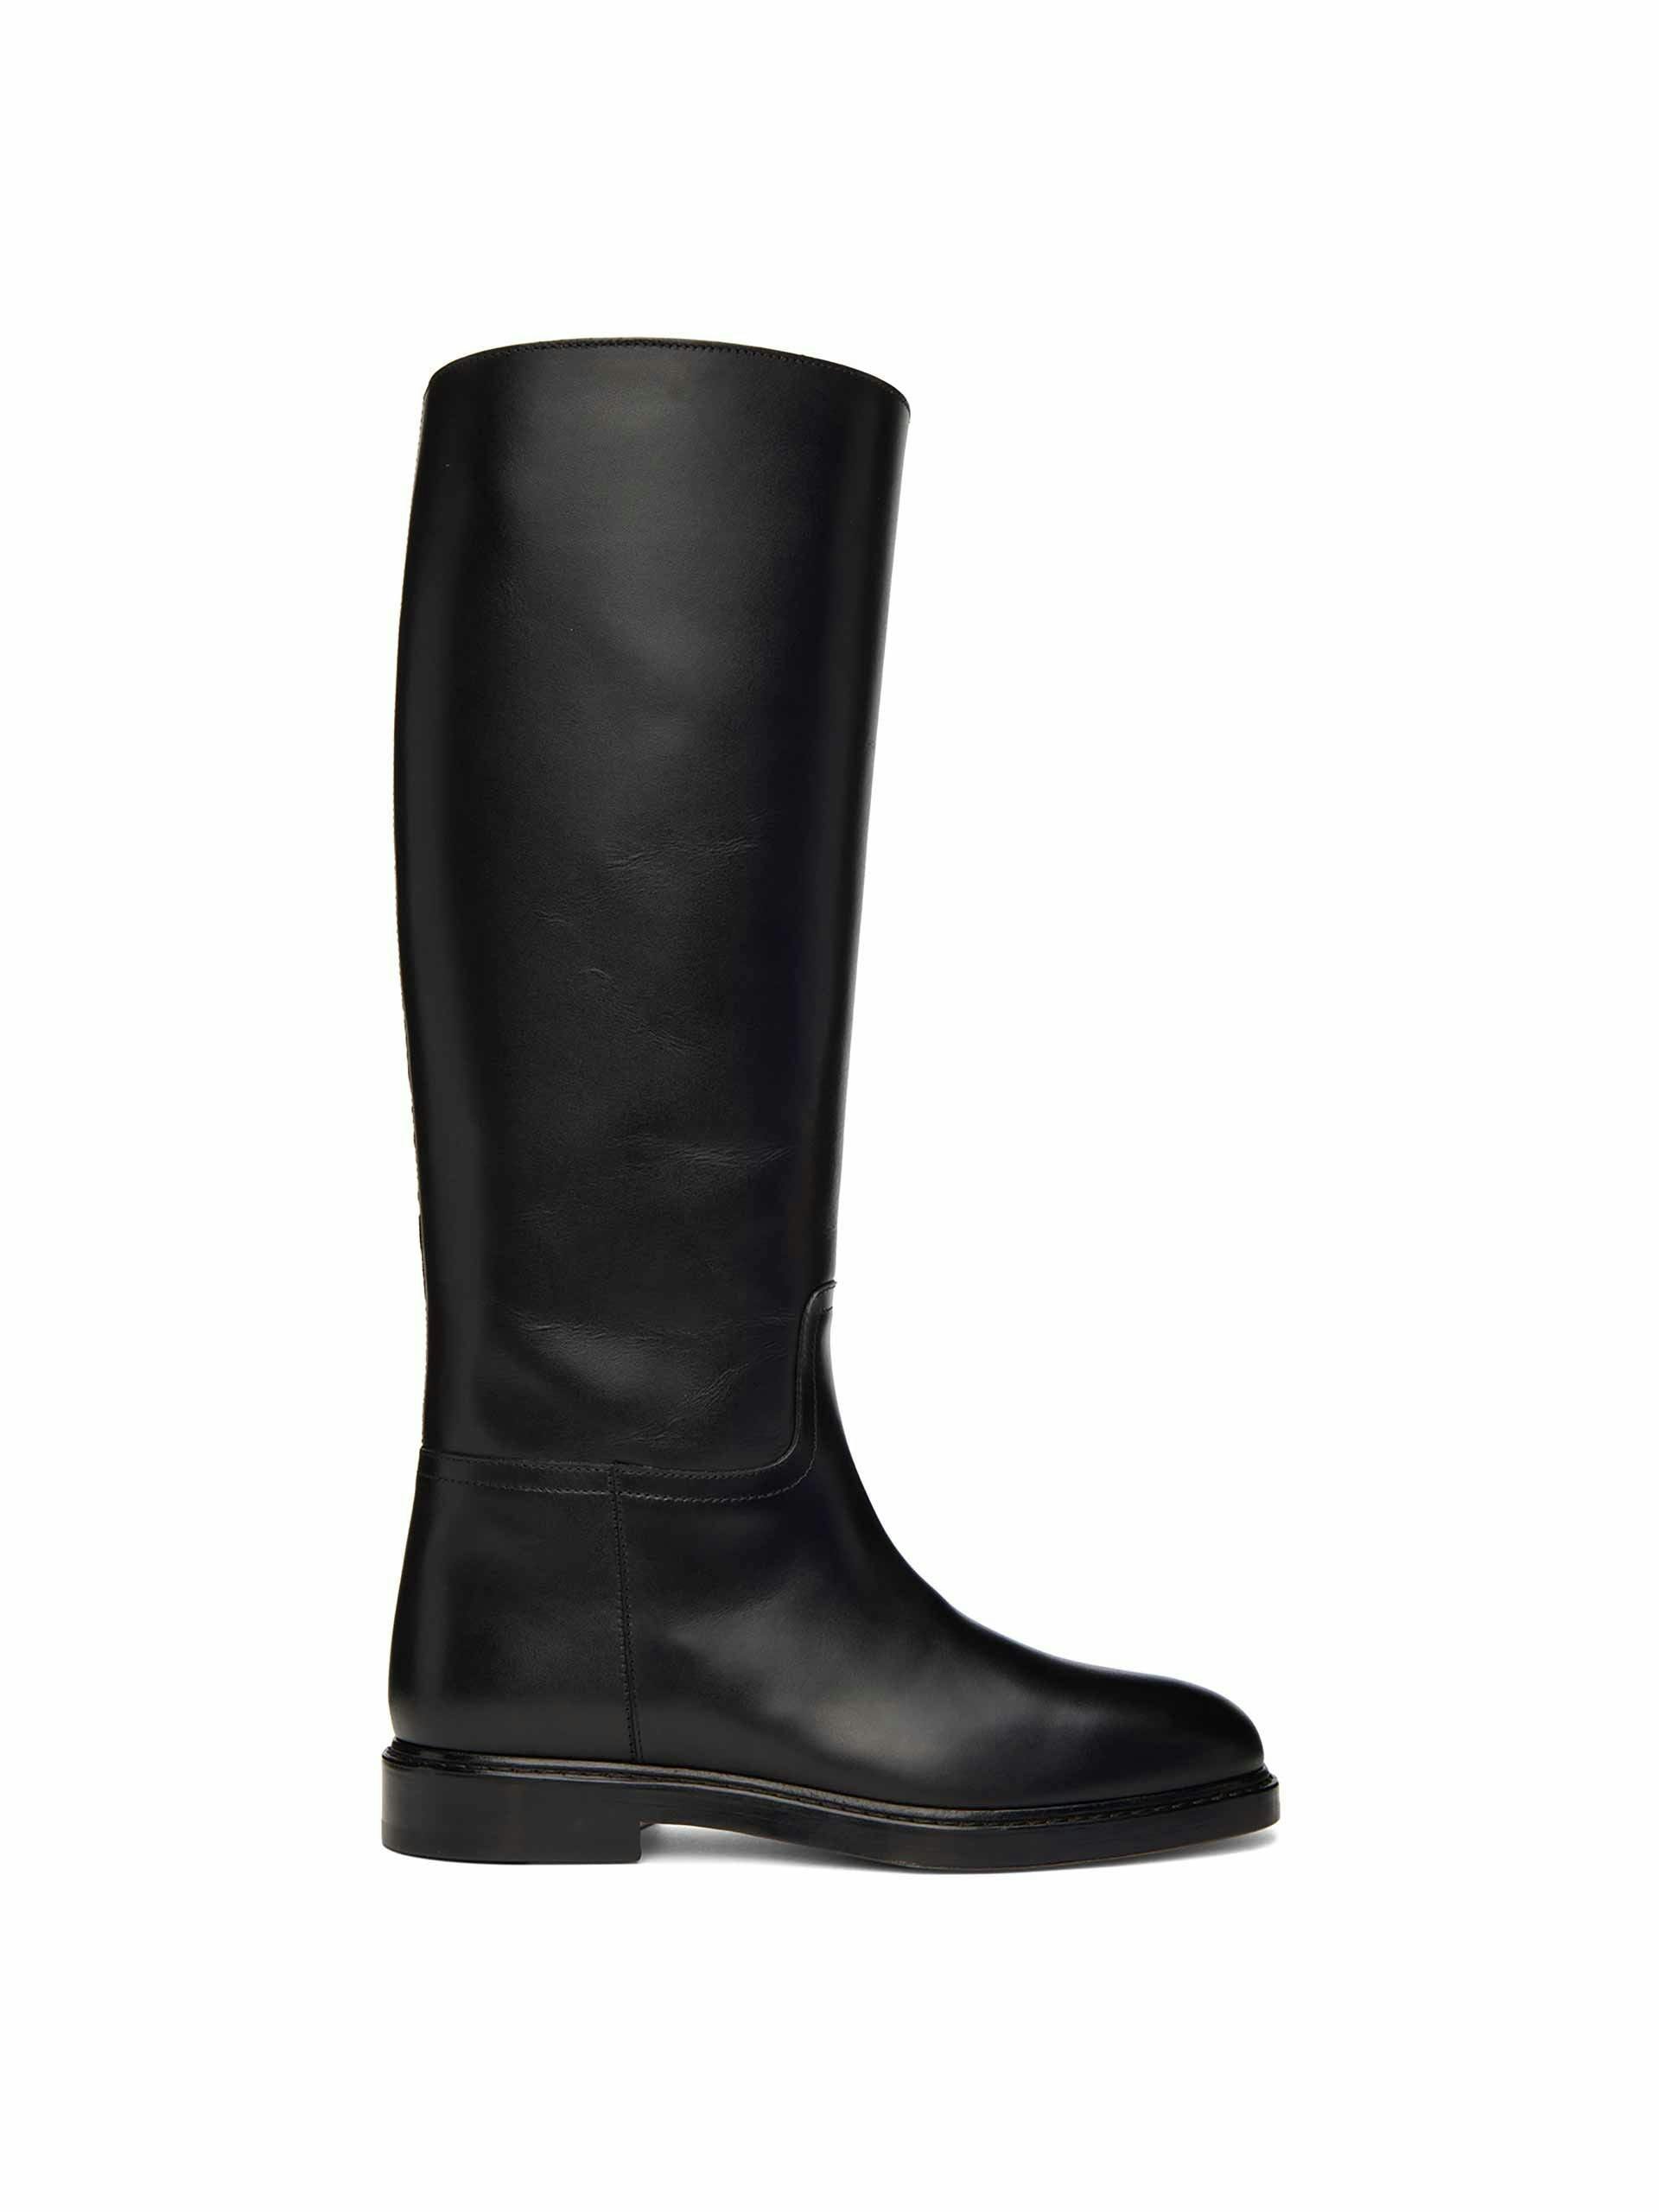 Black leather riding boots